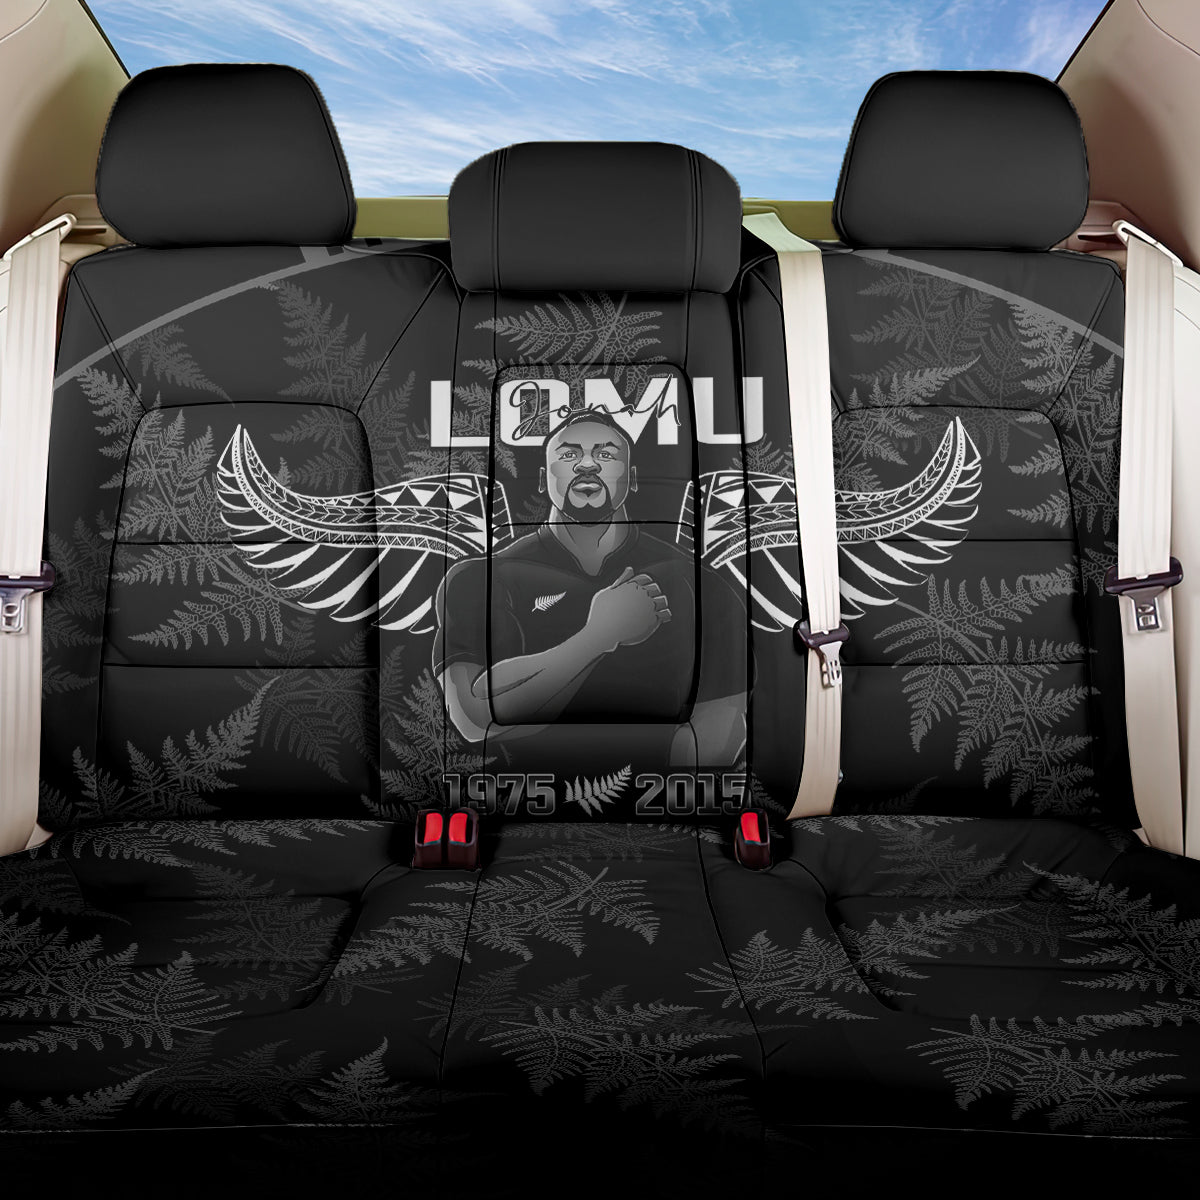 New Zealand Silver Fern Rugby Back Car Seat Cover Aotearoa Godfather Proud Gone But Never Forgotten